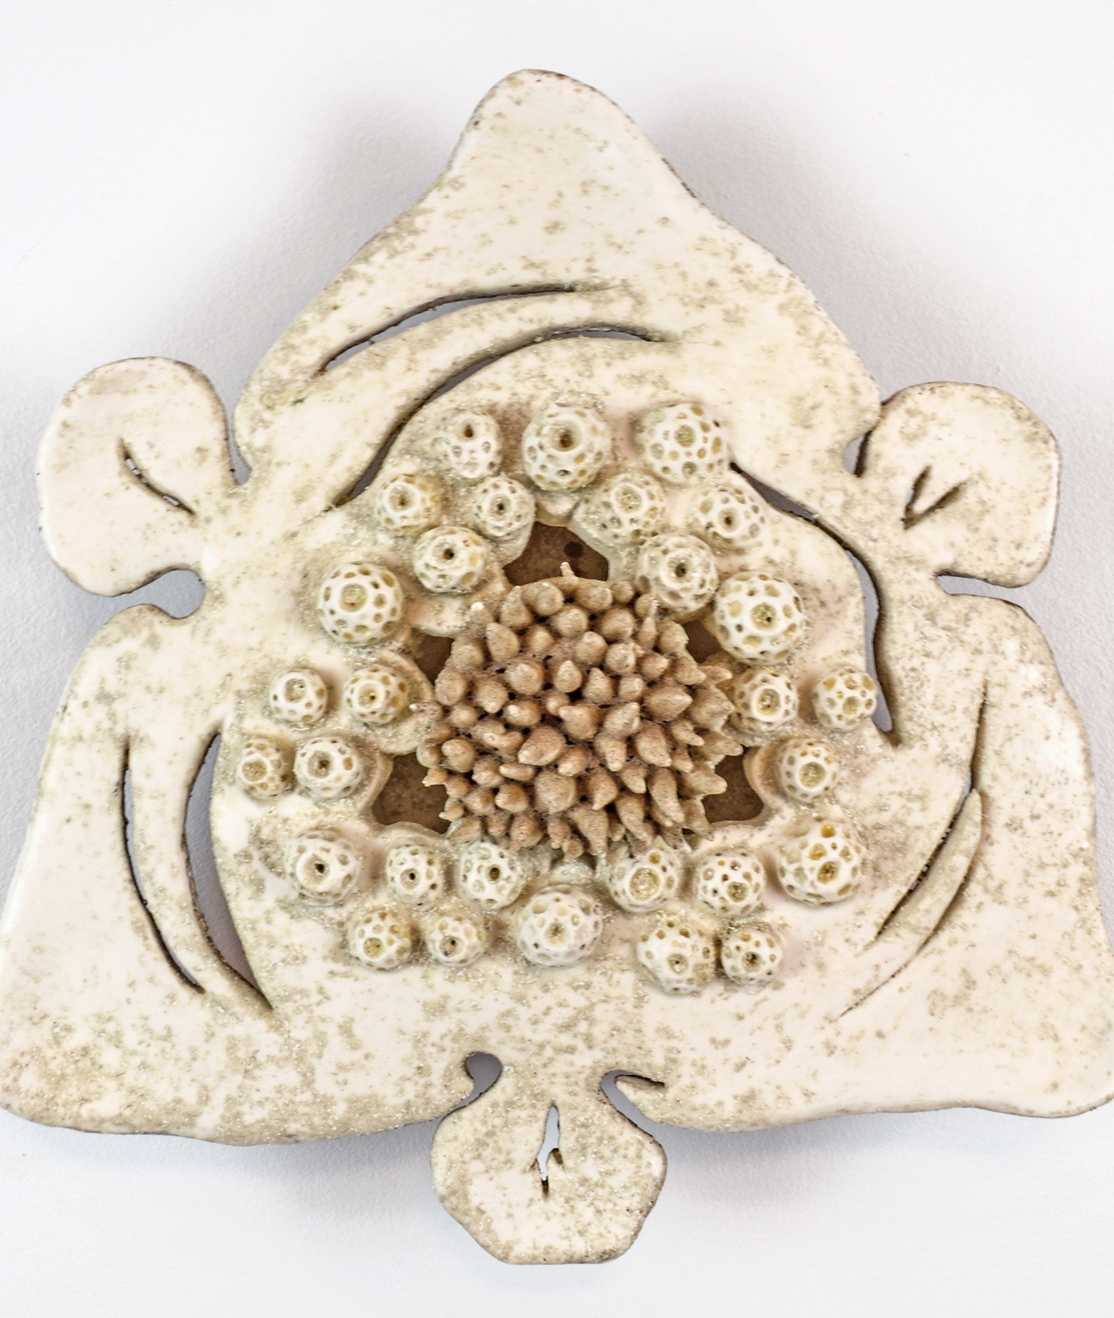 Detailed ceramic wall sculpture depicting the cellular structure of a Lily Flower Bud as seen through a micrograph, with an emphasis on organic forms, intricate patterns and textures. 